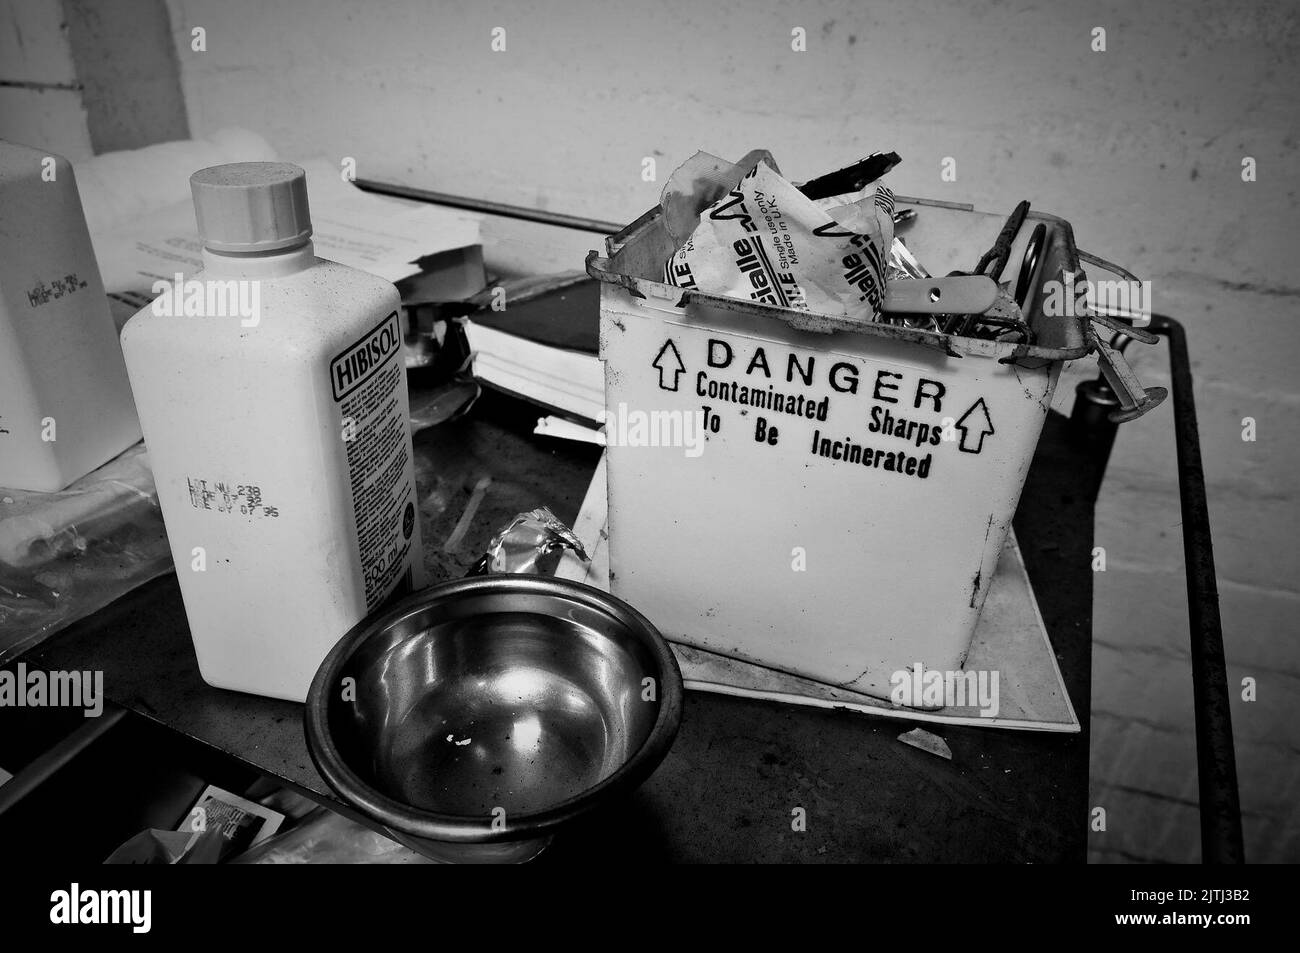 Sharps box full of sharp objects such as needles and surgical blades on a trolley in an abandoned mortuary morgue. Stock Photo